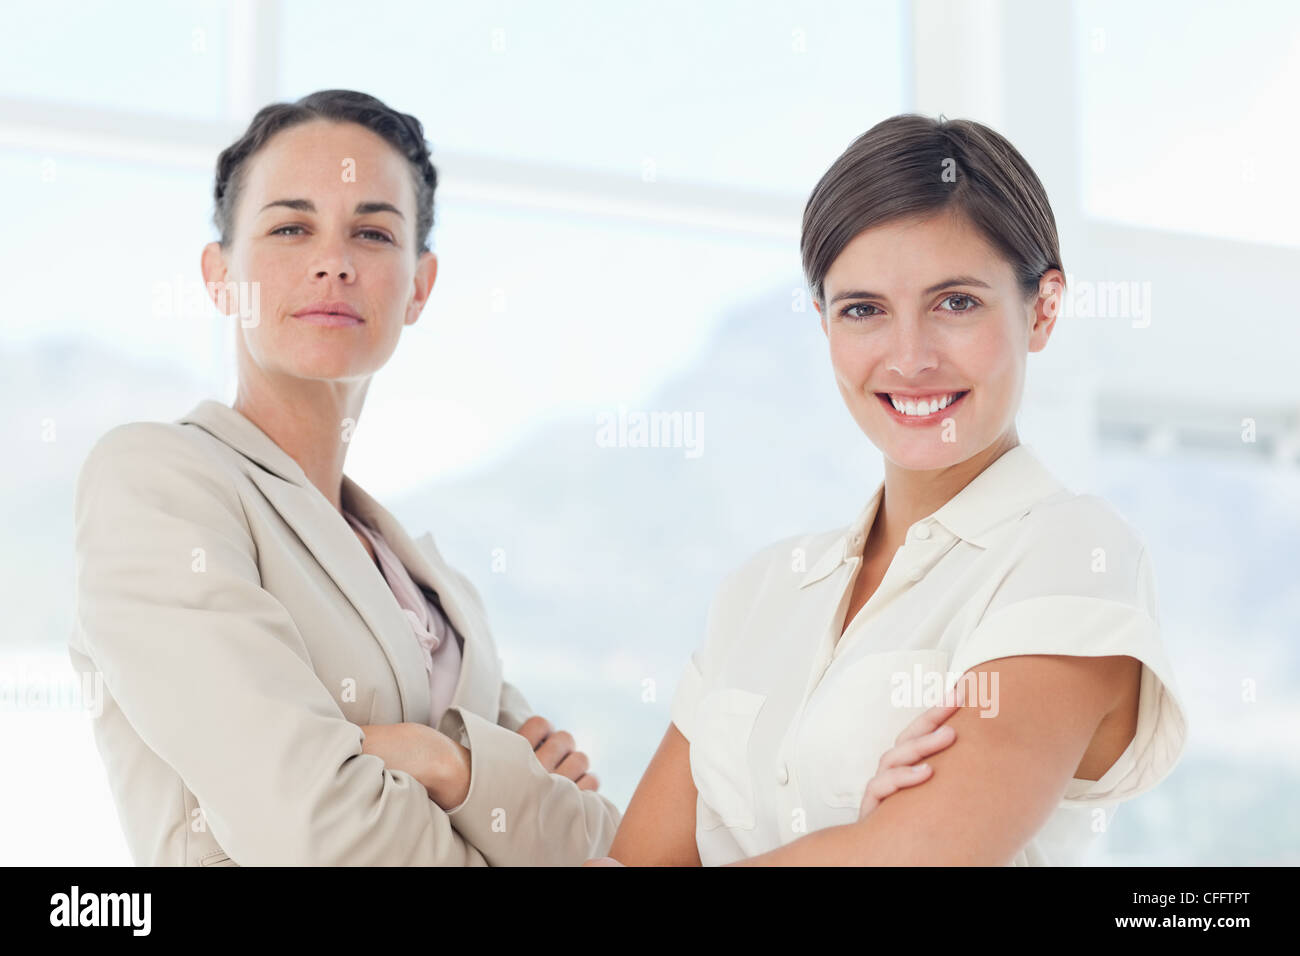 Confident businesswomen with arms crossed Stock Photo